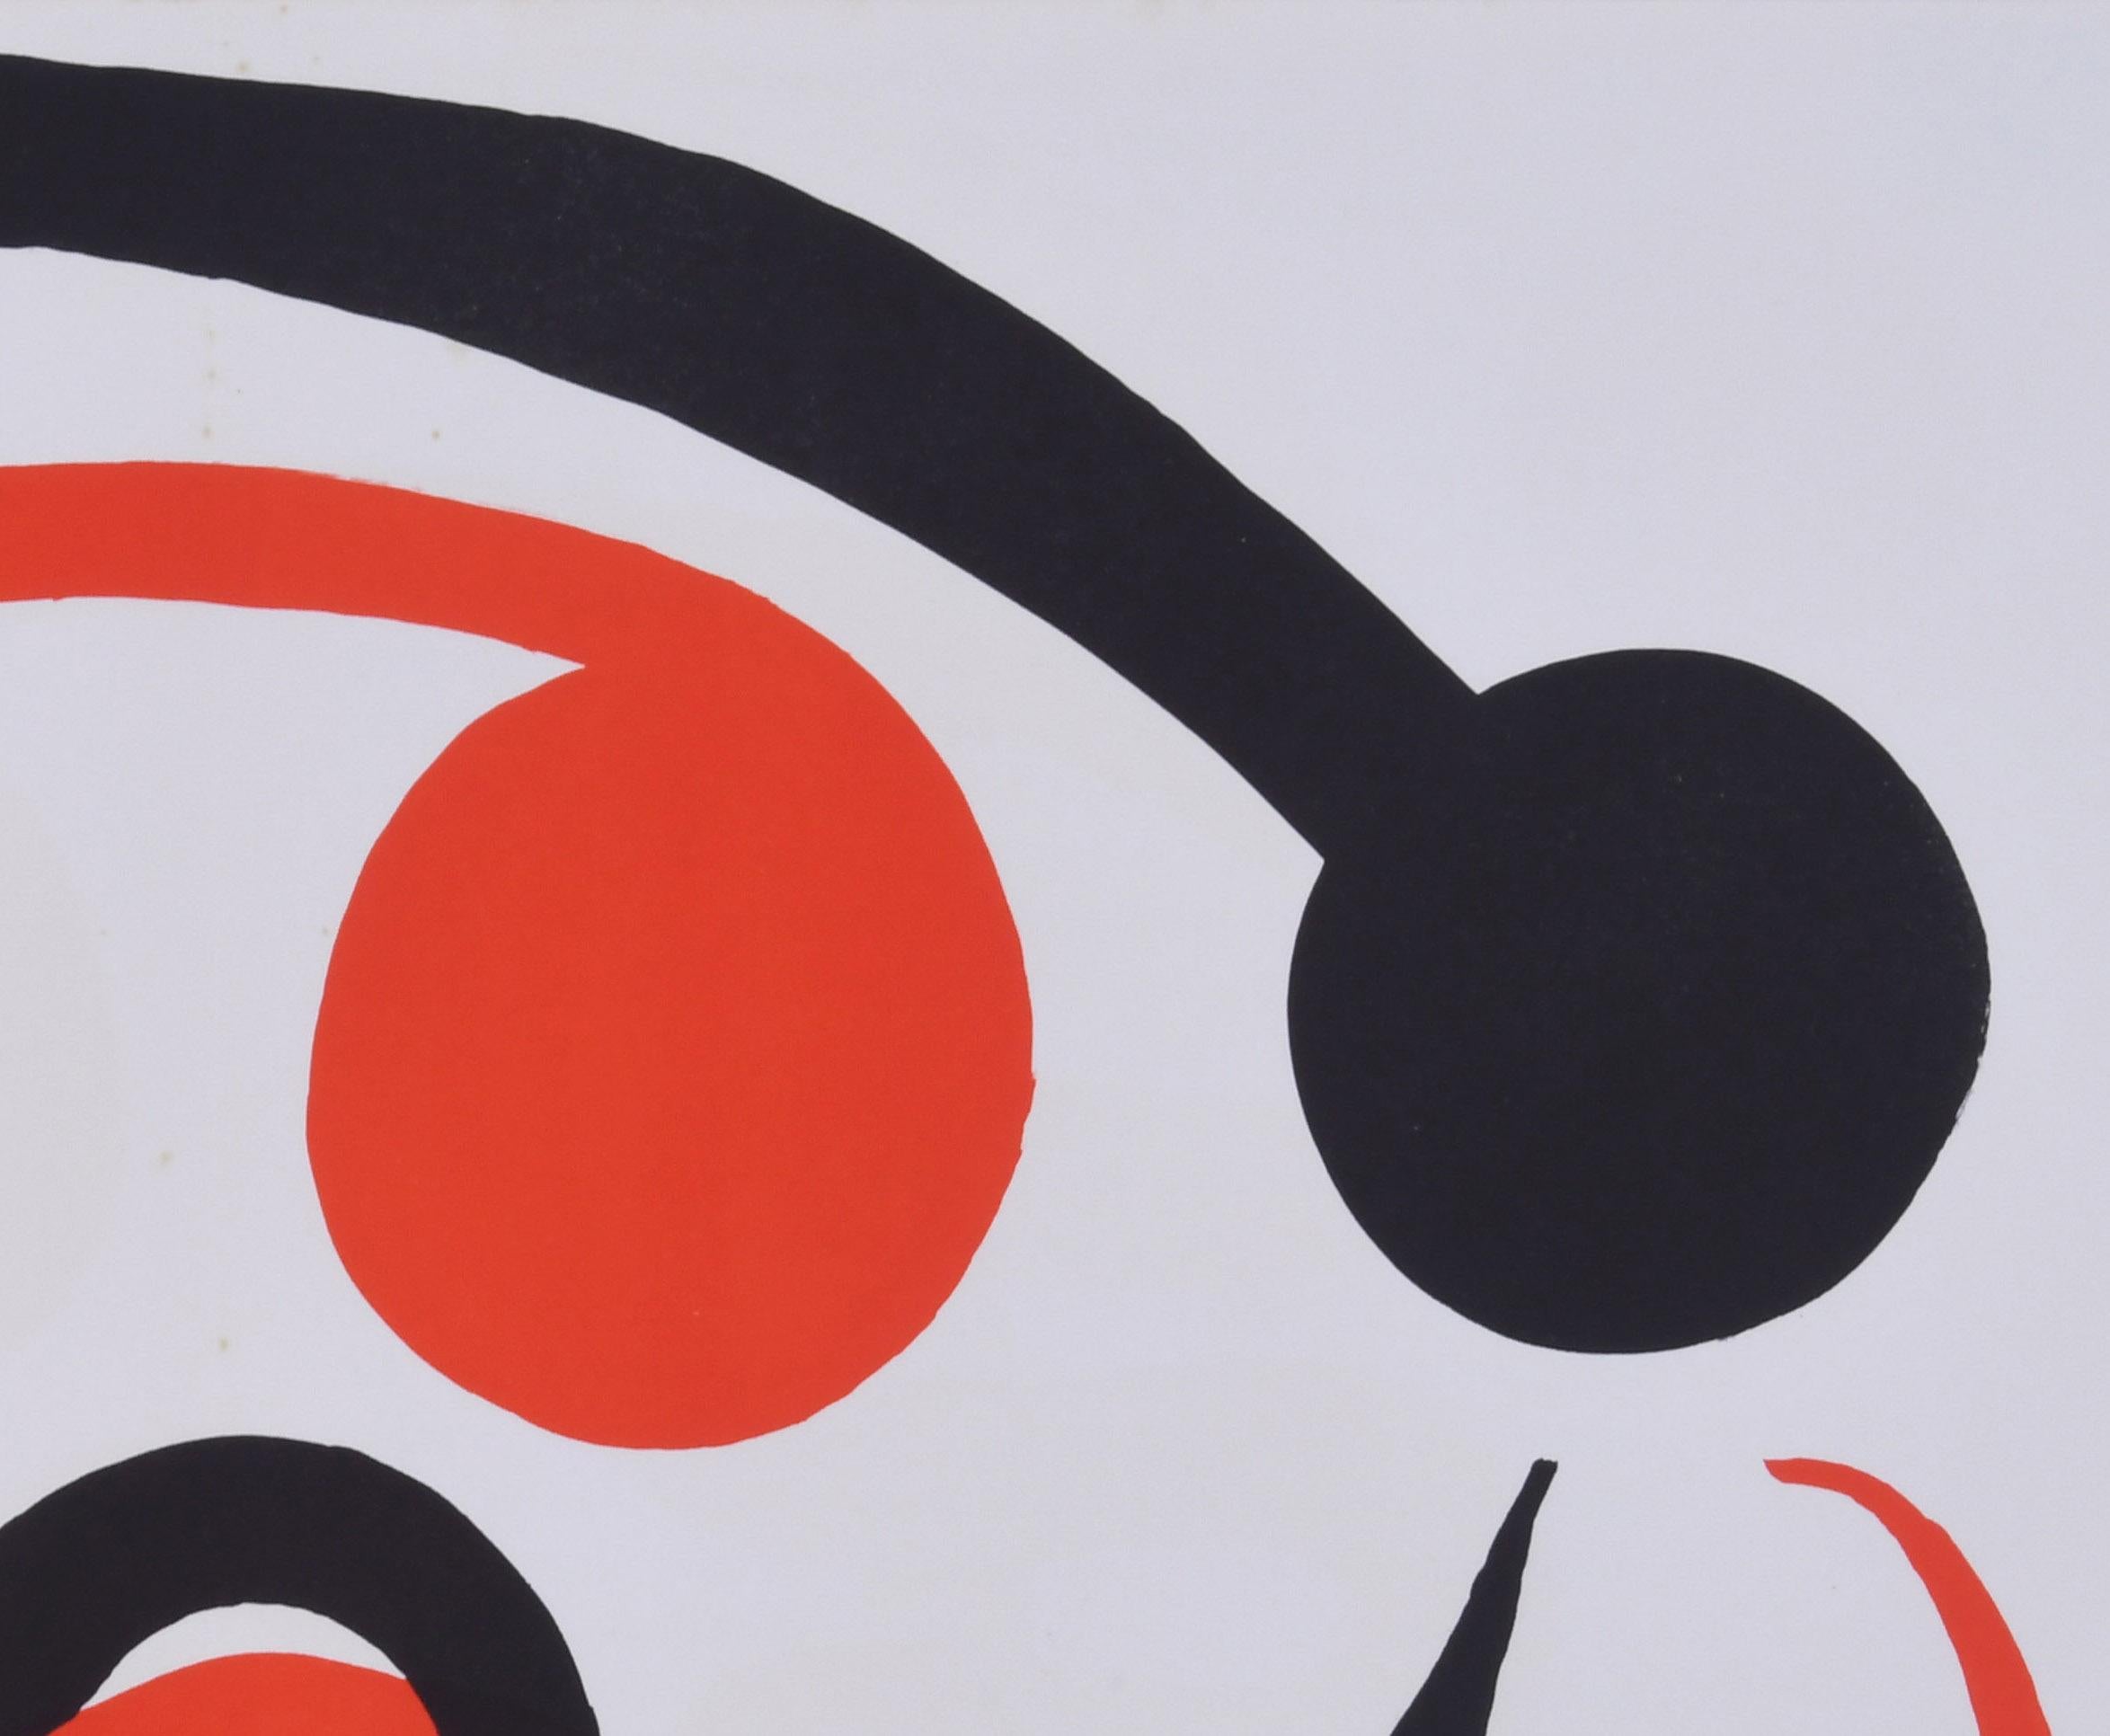 Derriere Le Miroir-Page 6-7 - Abstract Print by Alexander Calder